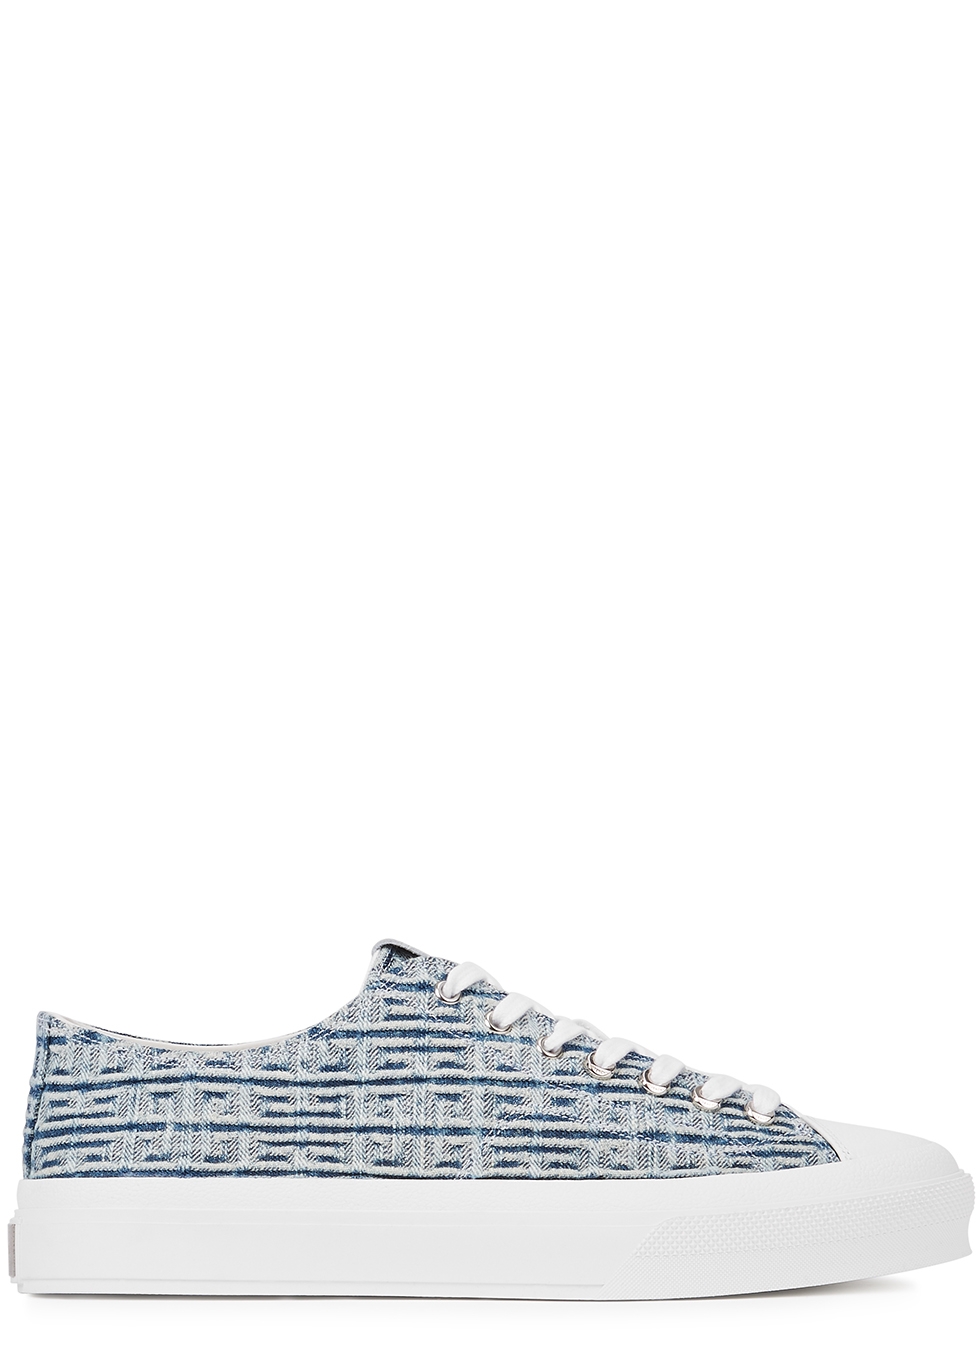 Givenchy City 4G blue denim sneakers